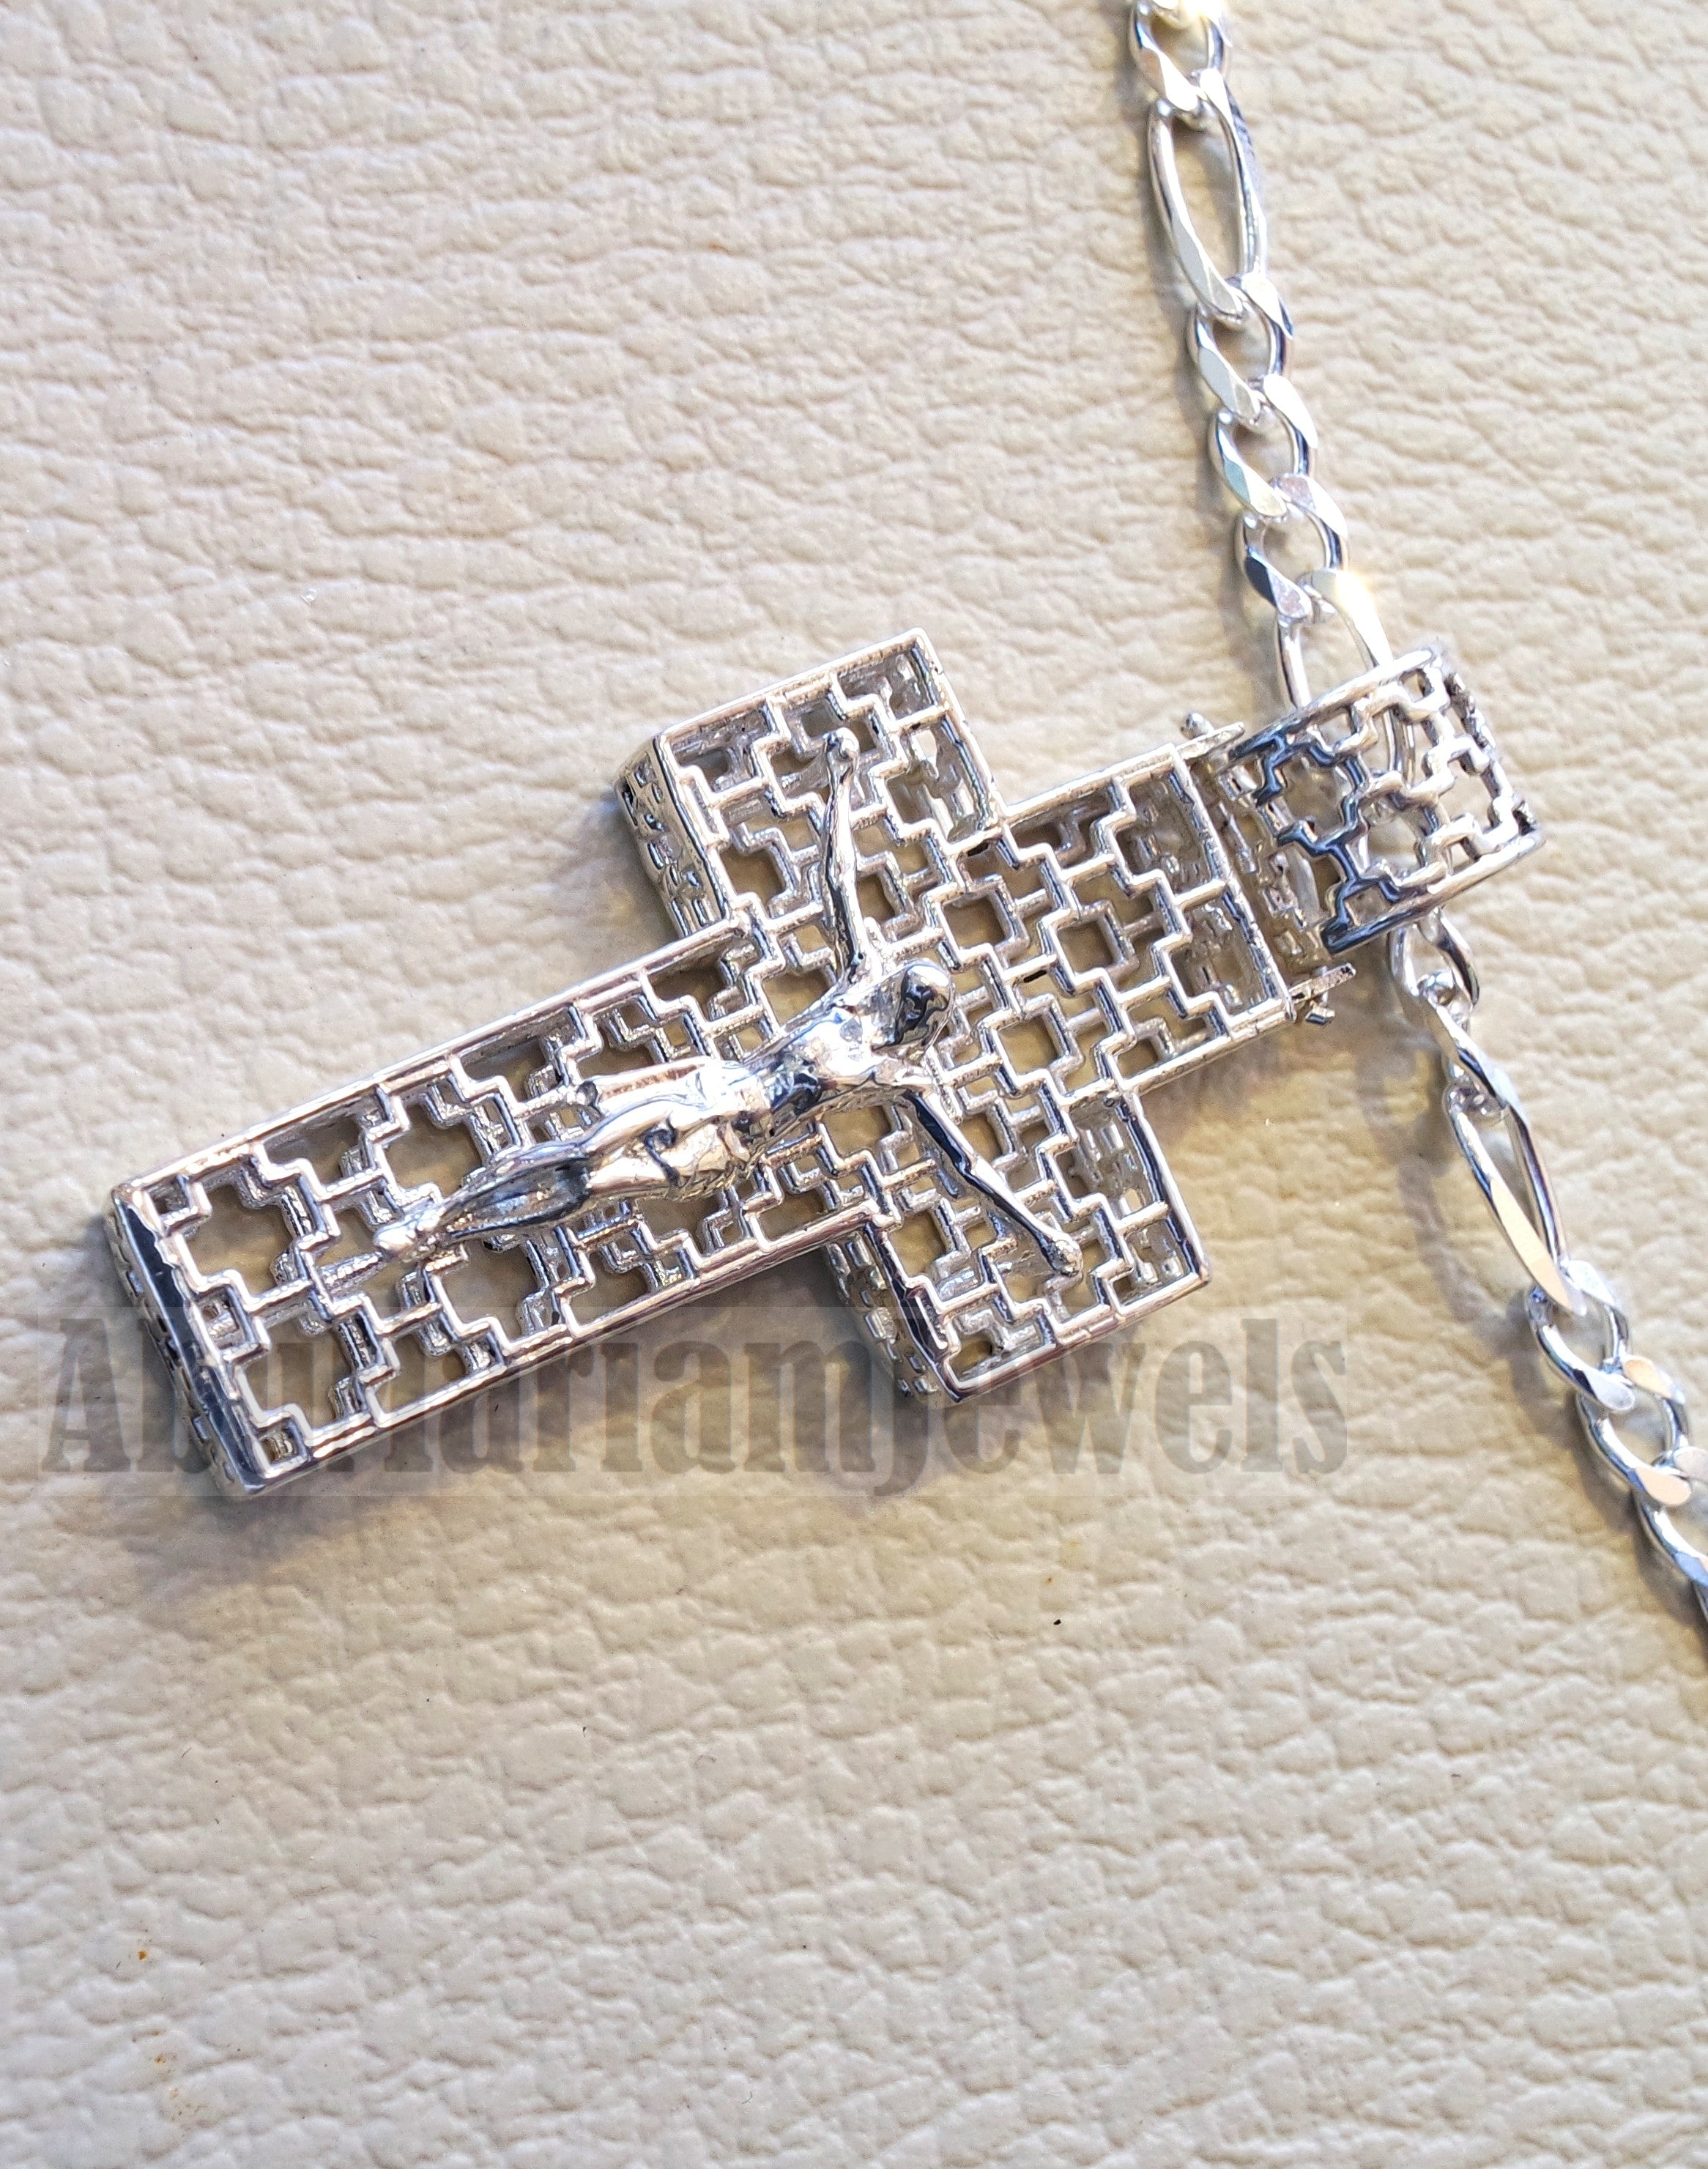 Cross necklace with thick chain sterling silver 925 jewelry Christianity 3d design man women religious gift express shipping